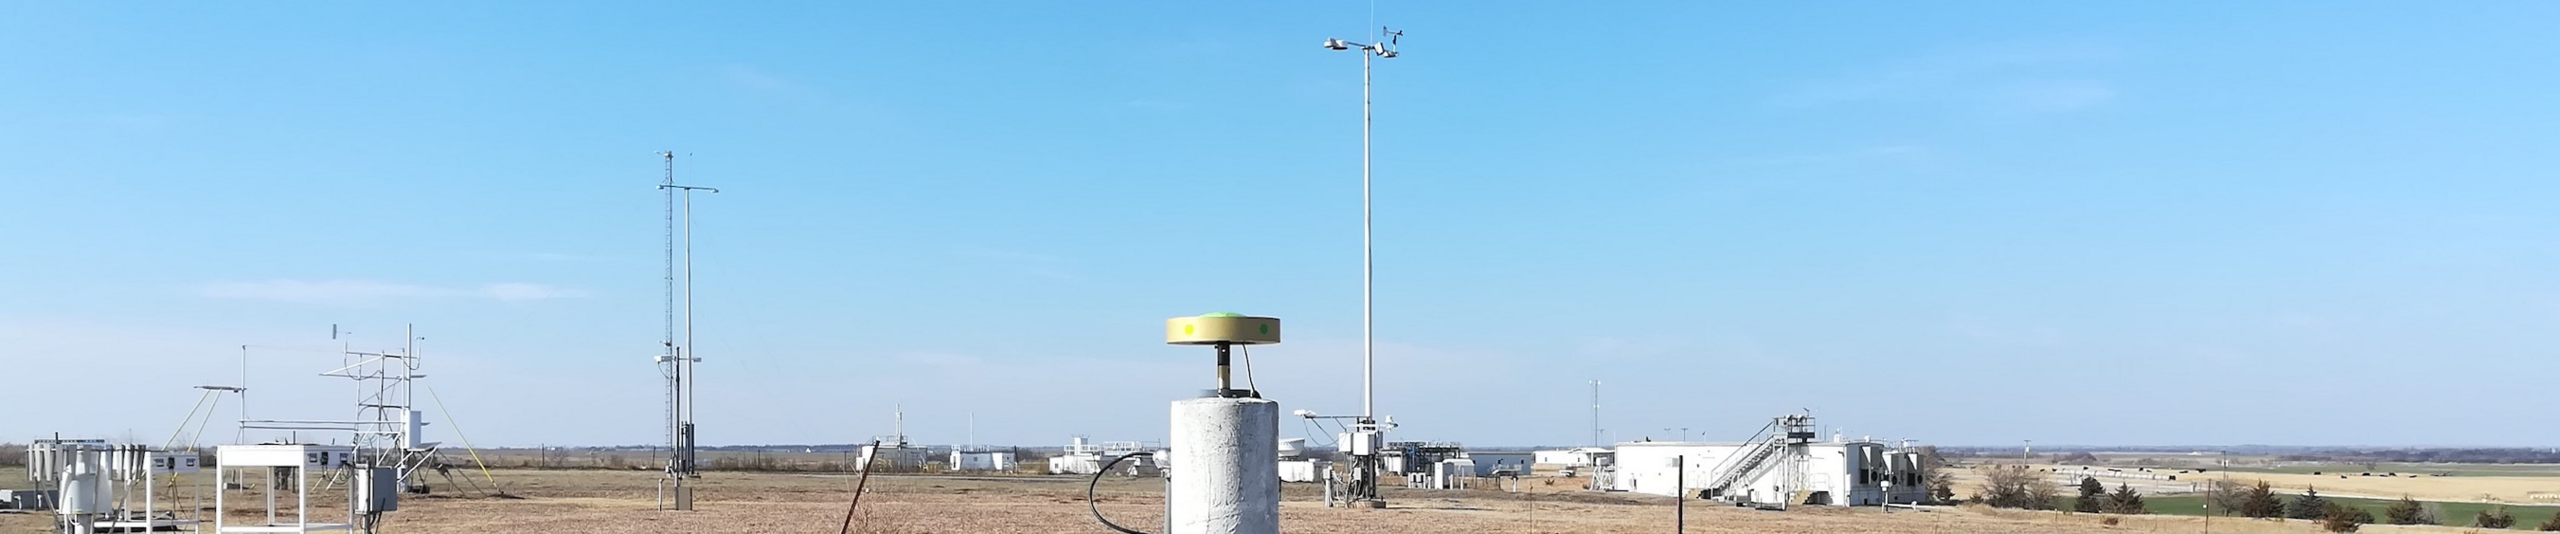 New GNSS antenna at GRUAN site Lamont (SGP), US